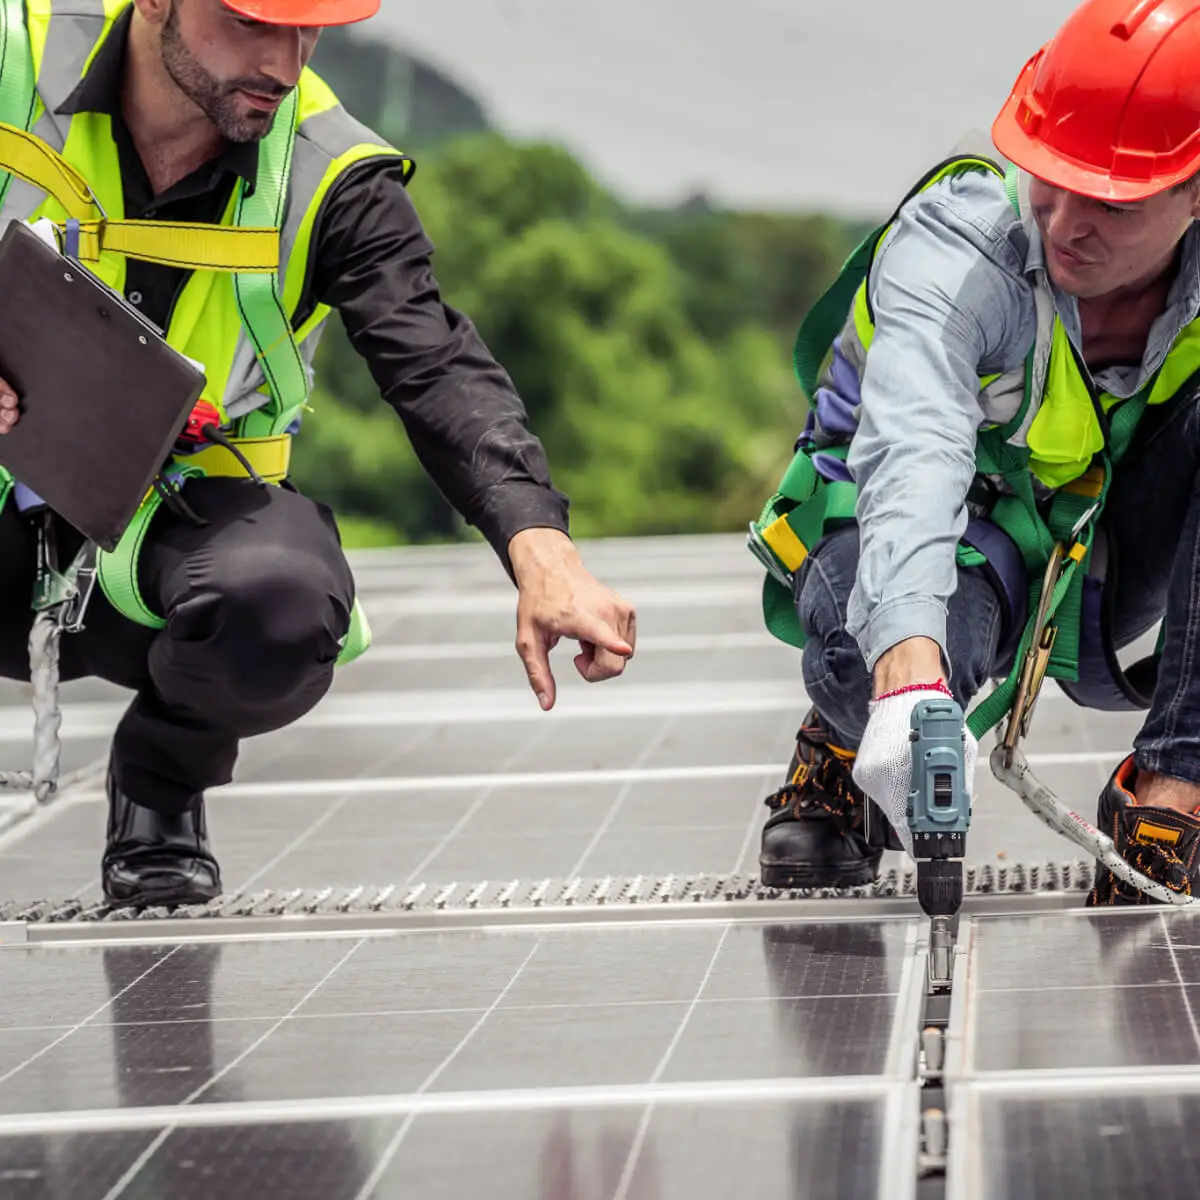 Two people stand on top of a solar panel covered roof. One person is pointing out fixes that need to be made from a checklist he has in his hand. The other person has a drill in one hand and is listening intently to the directions.